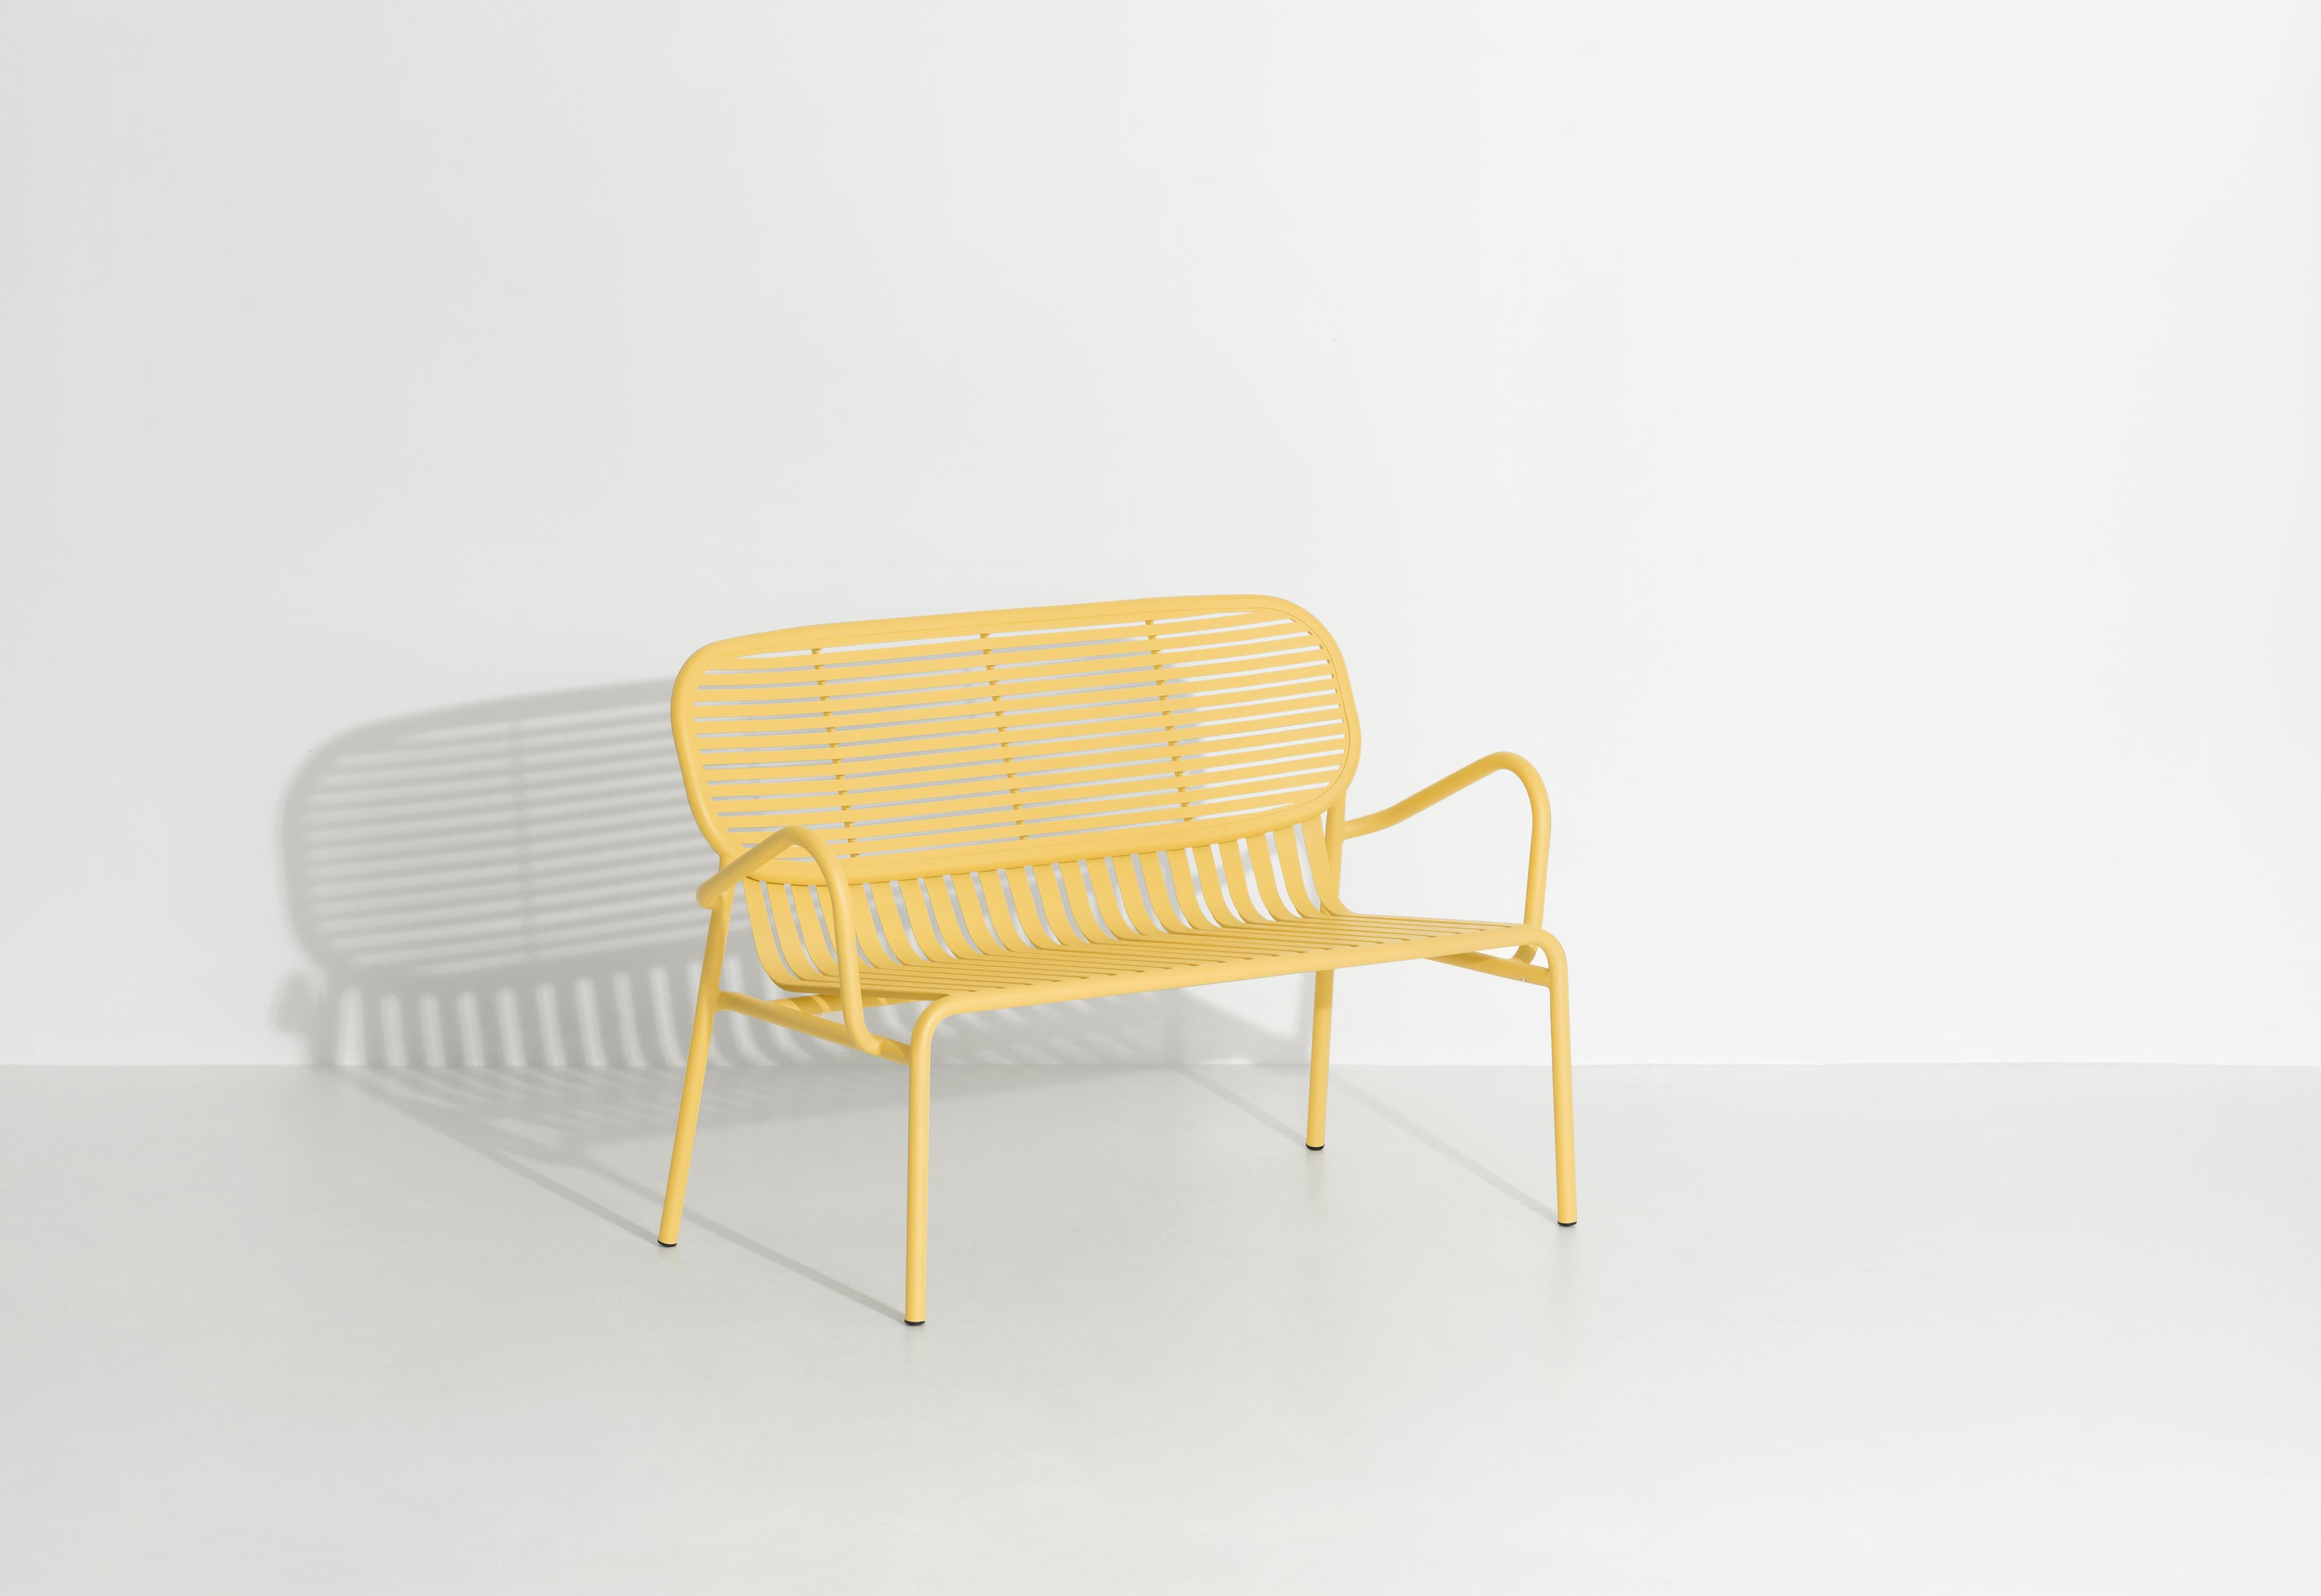 Petite Friture Week-End Sofa in Saffron Aluminium by Studio BrichetZiegler, 2017

The week-end collection is a full range of outdoor furniture, in aluminium grained epoxy paint, matt finish, that includes 18 functions and 8 colours for the retail